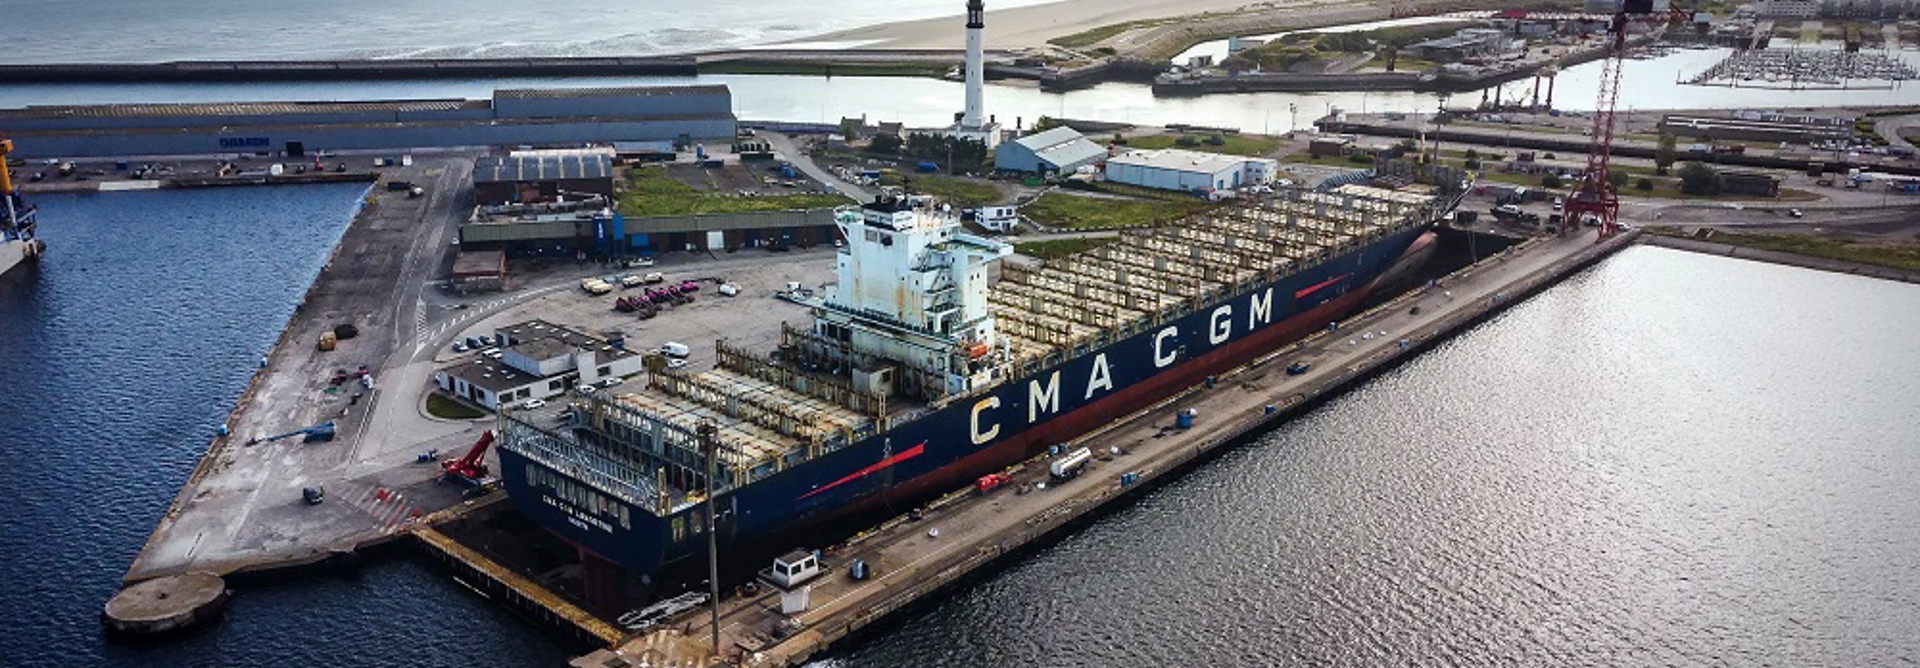 Damen Shipyards And CMA CGM To Cooperate On Increasing Container Ship Efficiency